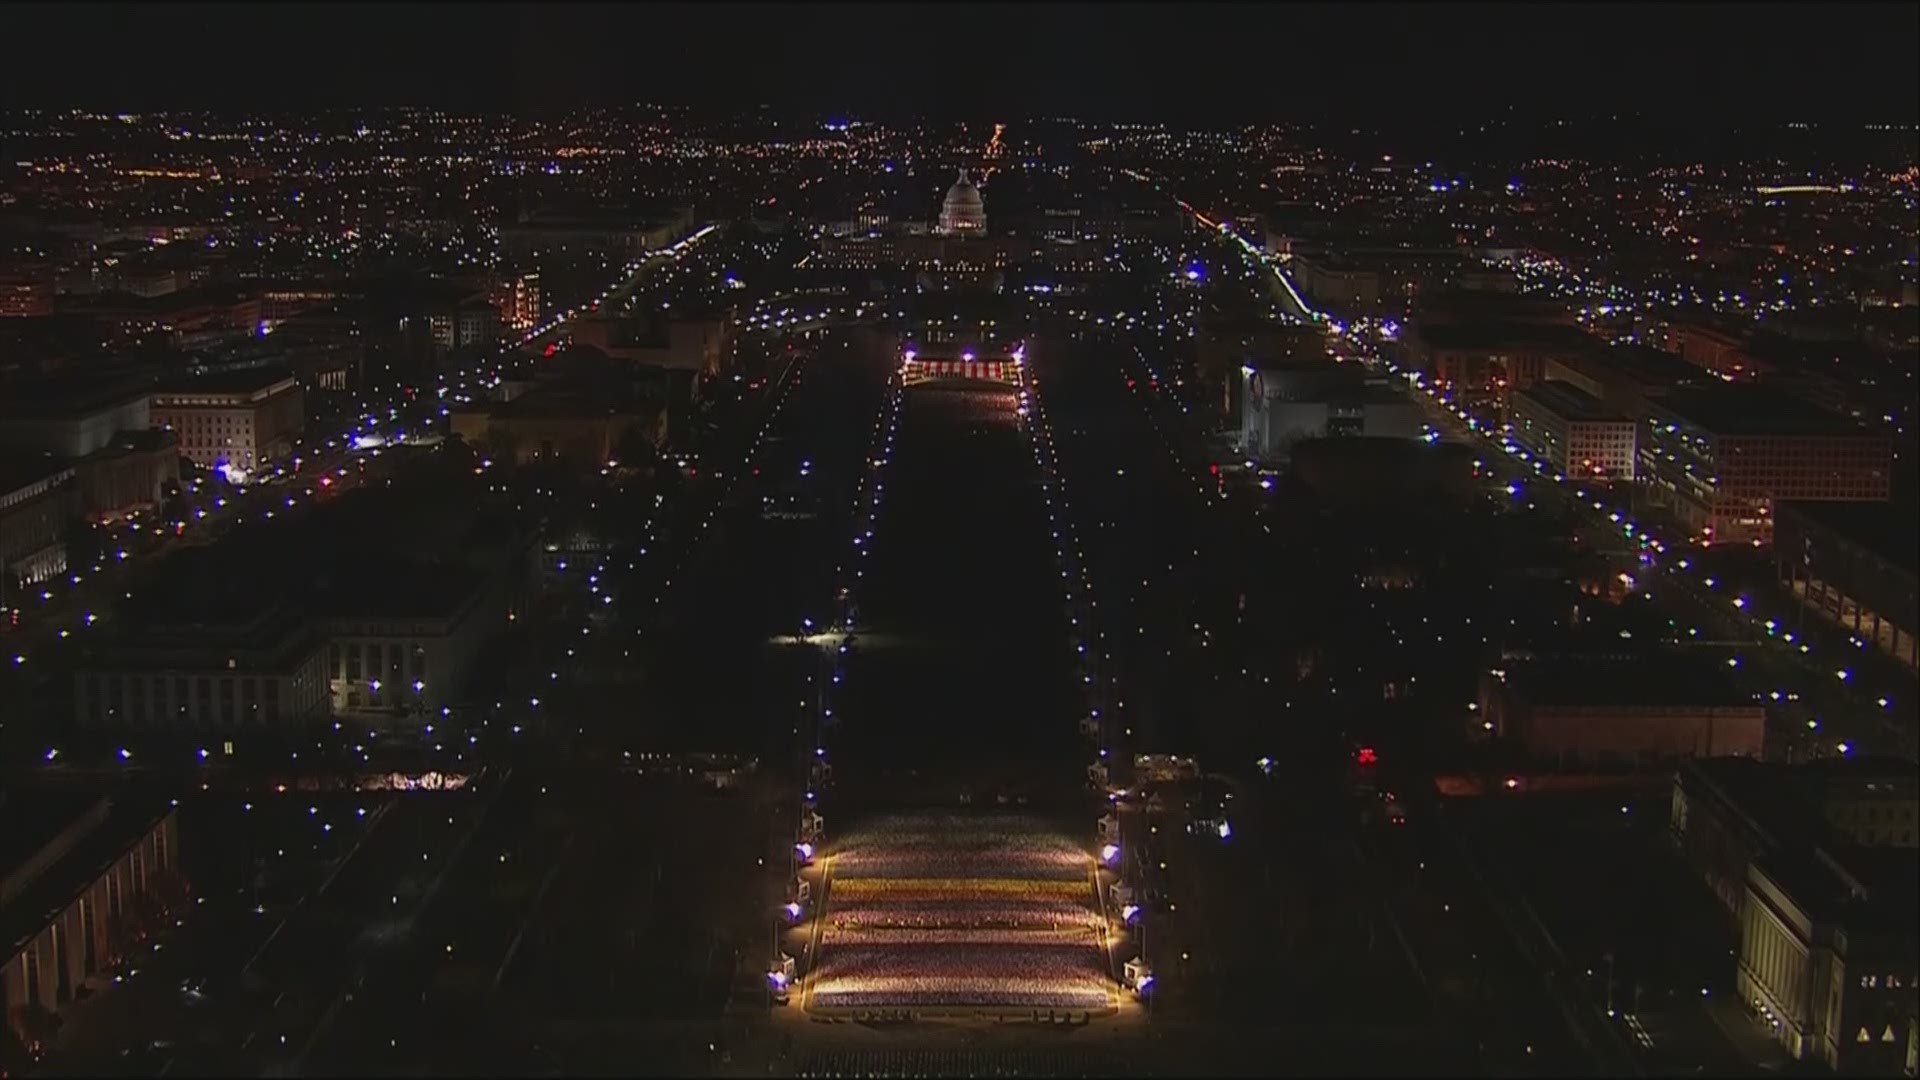 Flags from every state and territory now line the National Mall in front of the U.S. Capitol building.